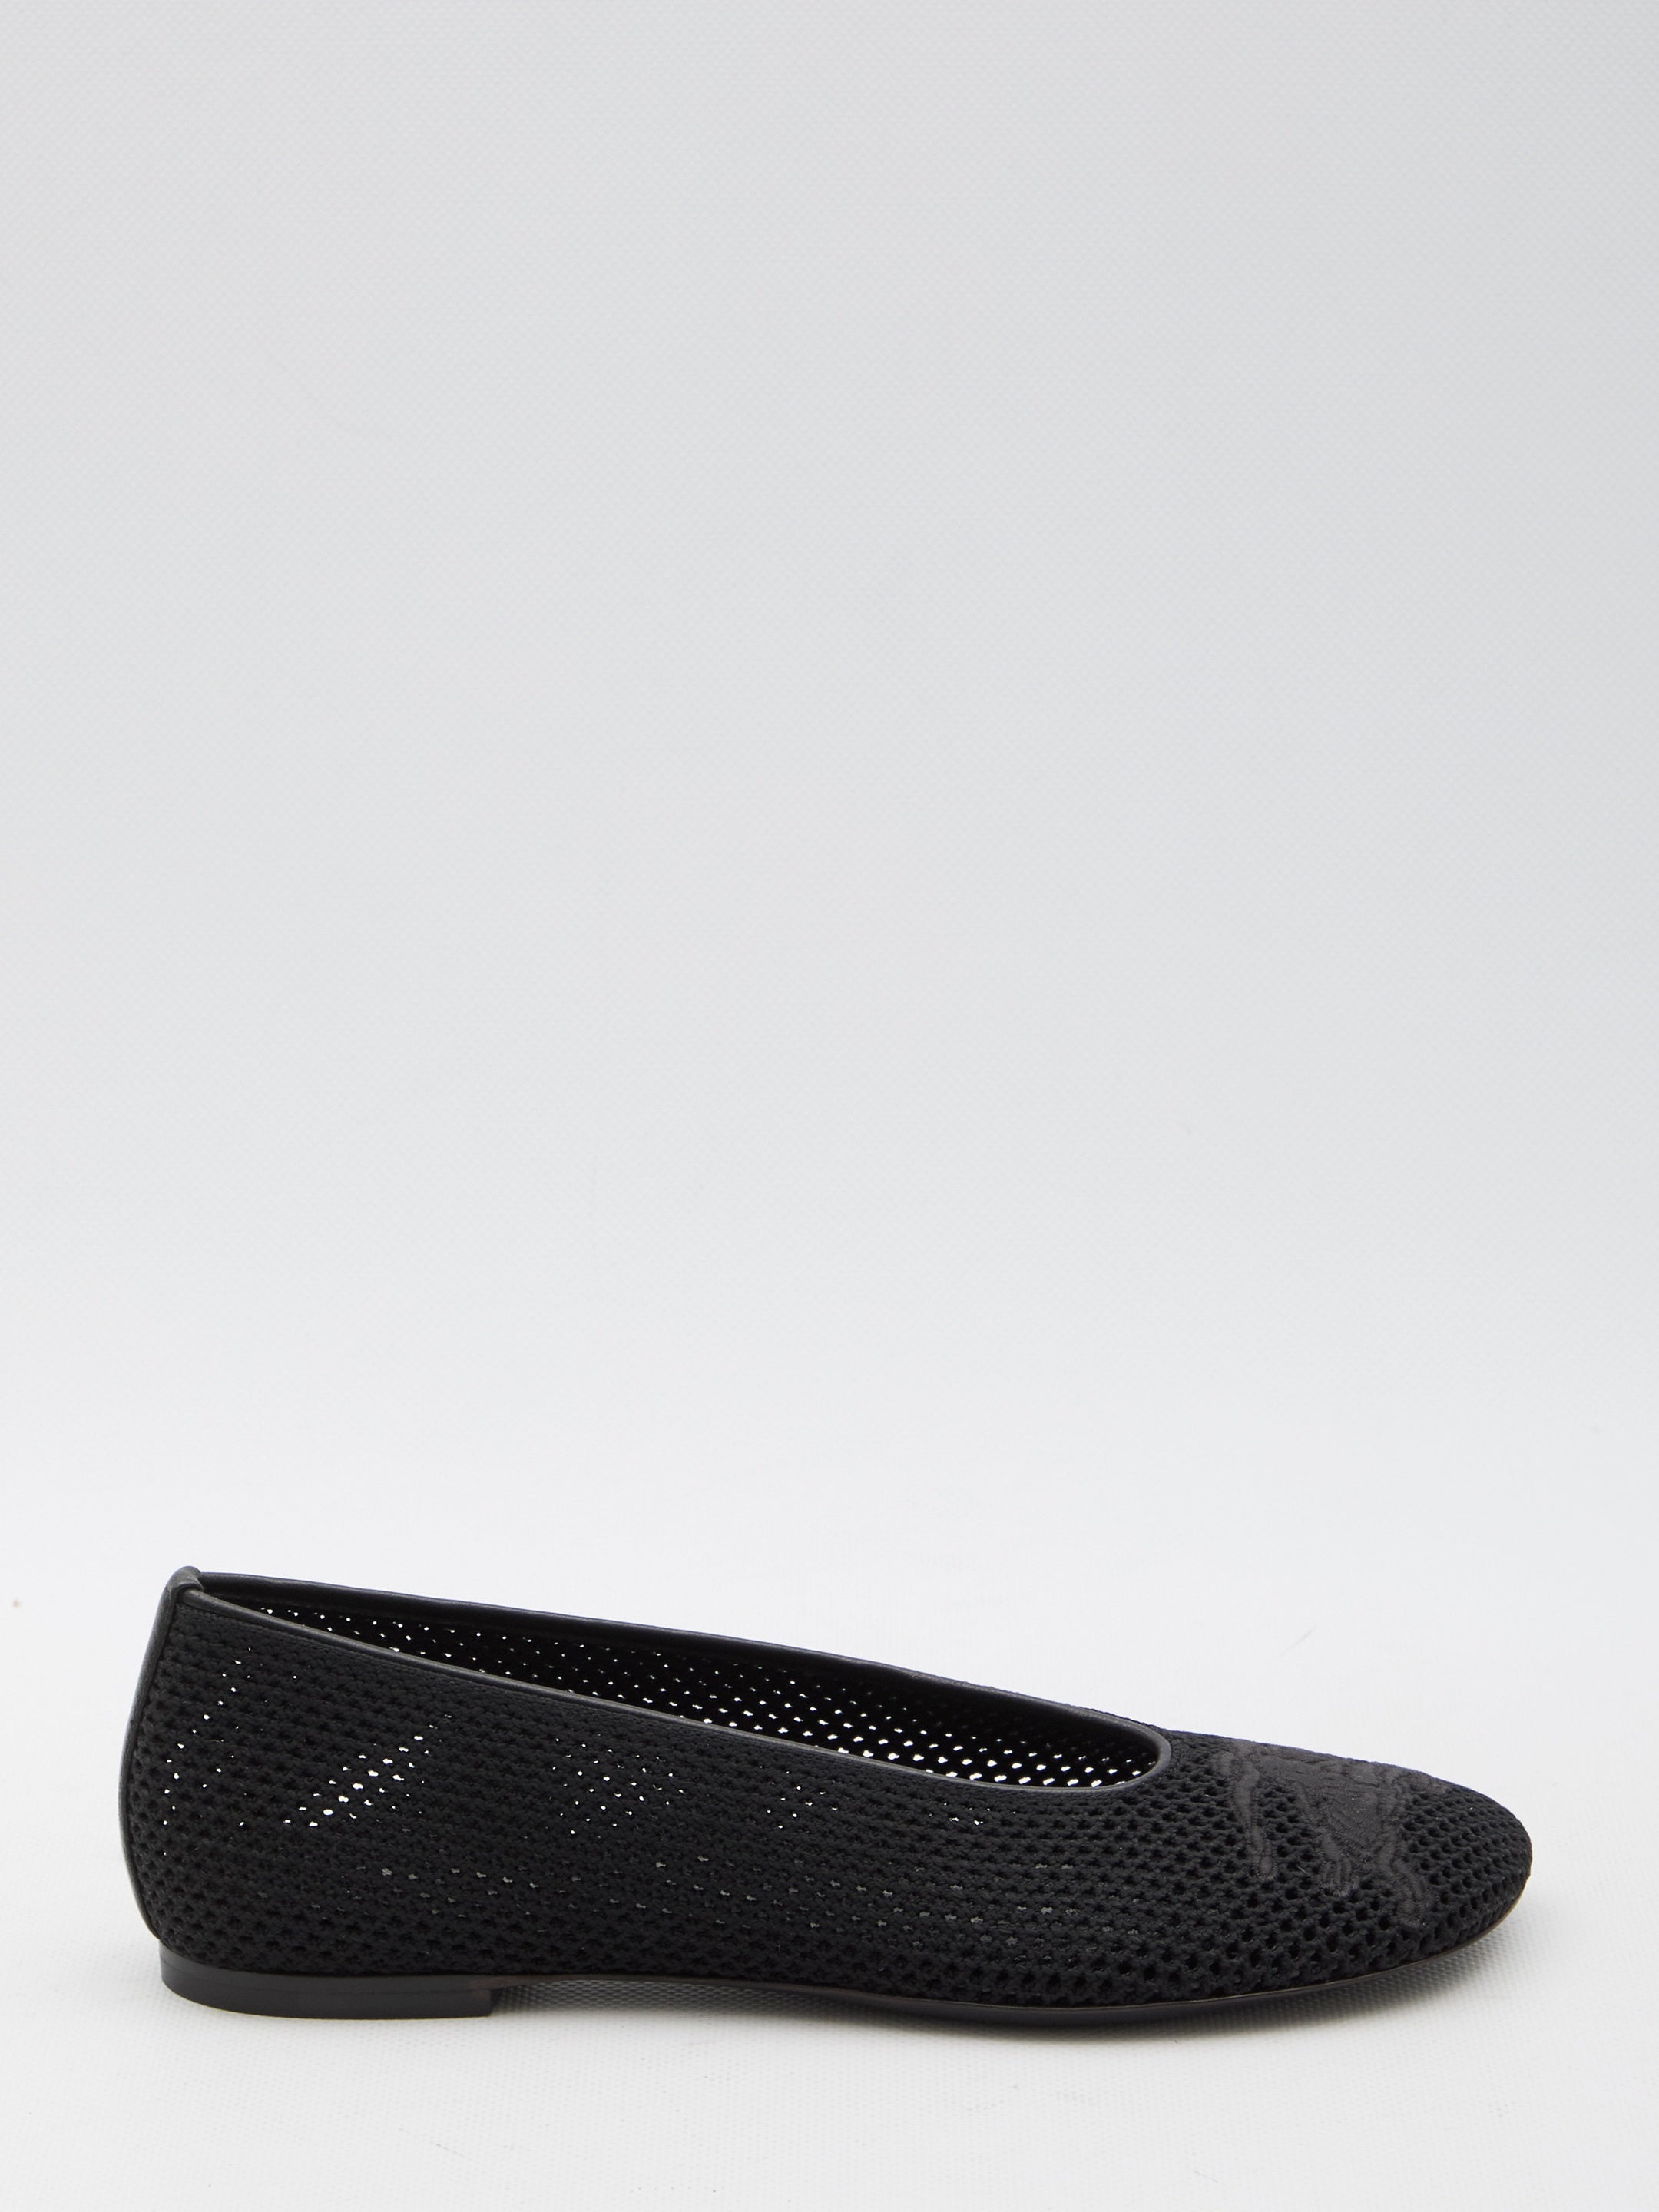 BURBERRY-OUTLET-SALE-Mesh-fabric-ballerinas-Flache-Schuhe-36-BLACK-ARCHIVE-COLLECTION.jpg